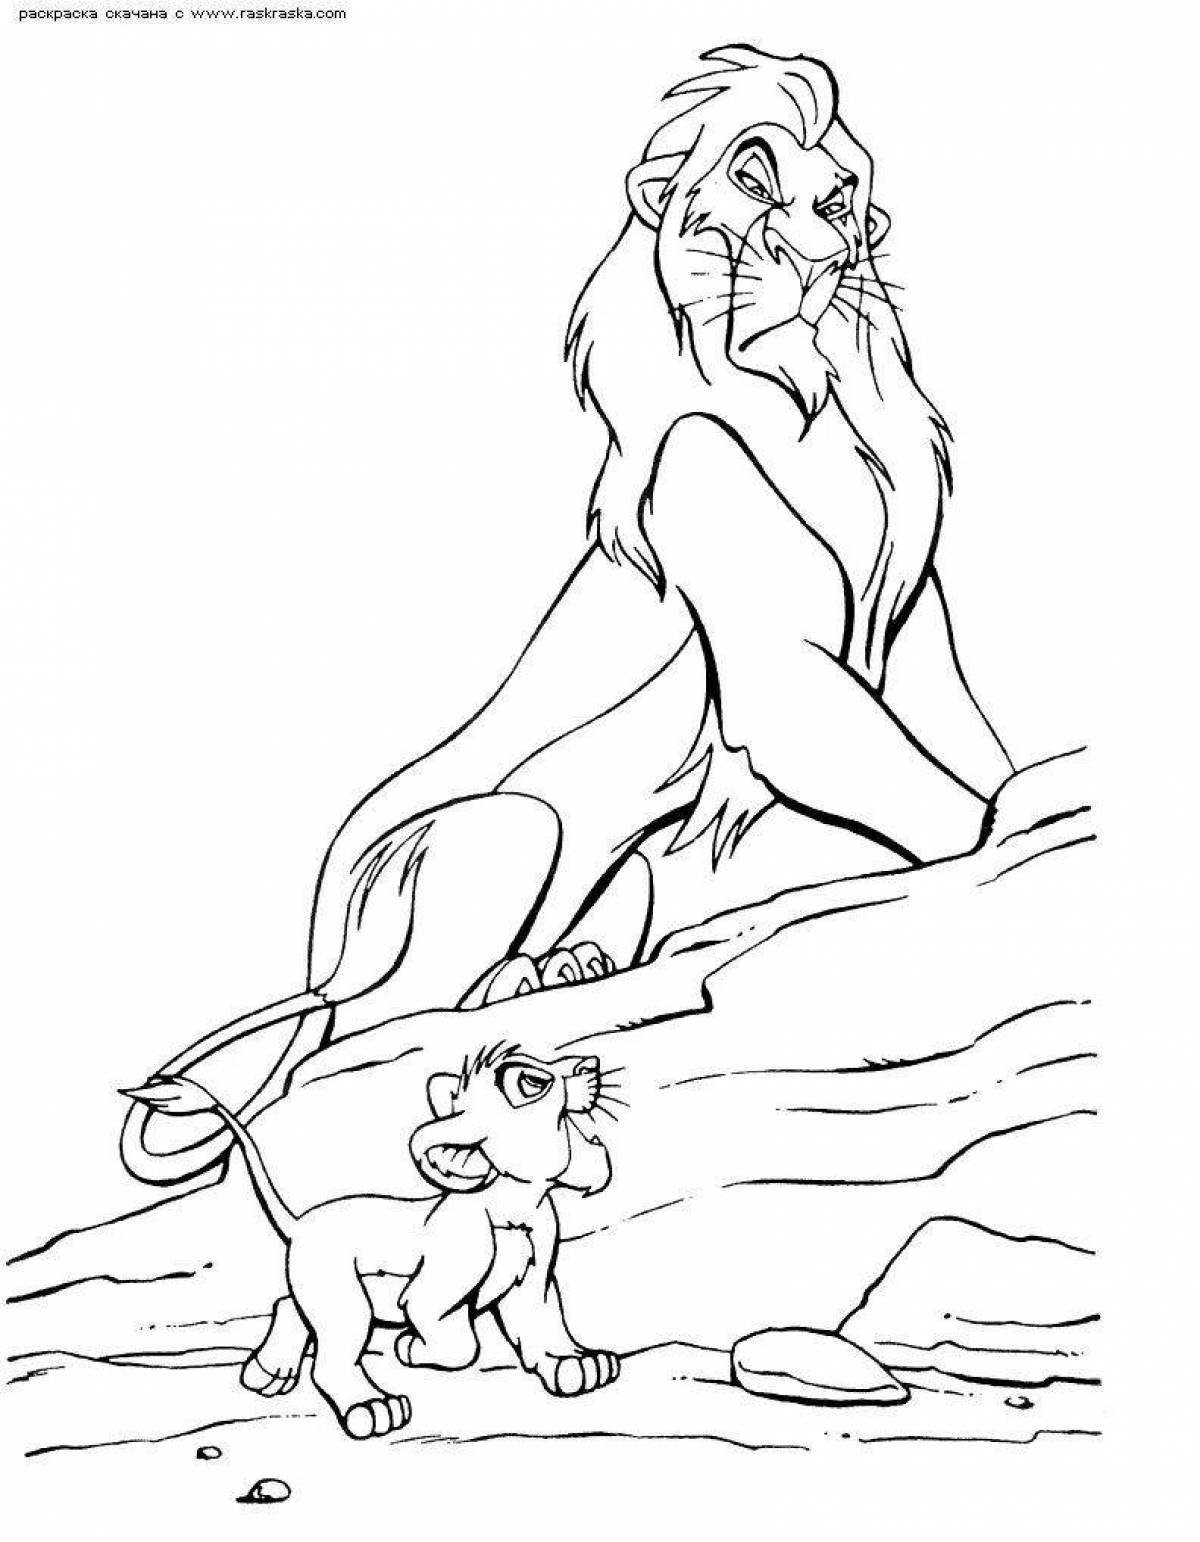 Charming scar coloring book